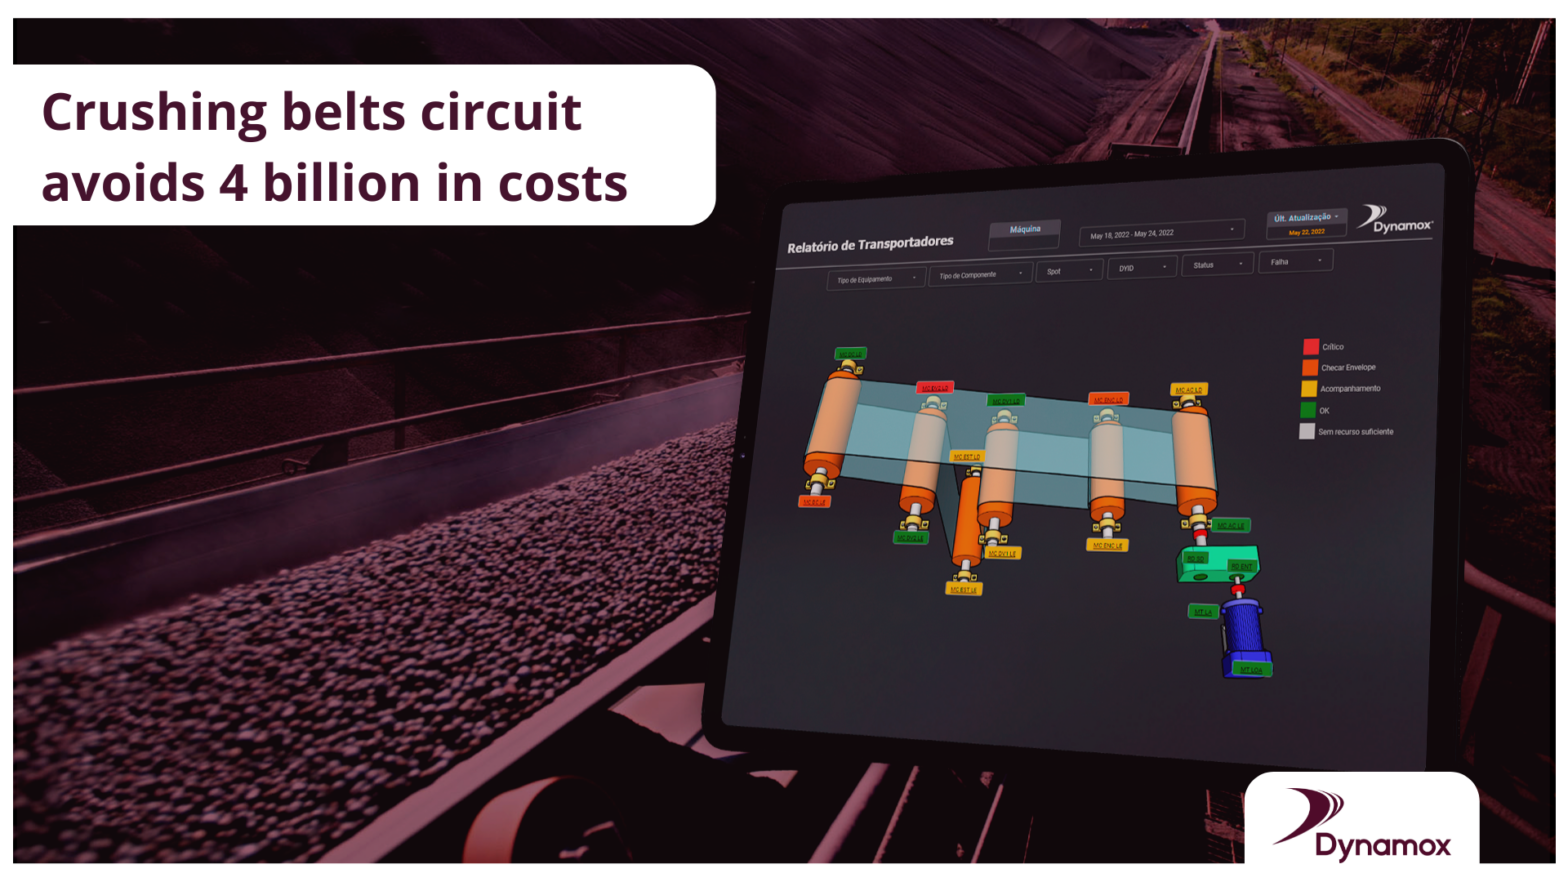 Crushing belts circuit avoids 4 billion in costs